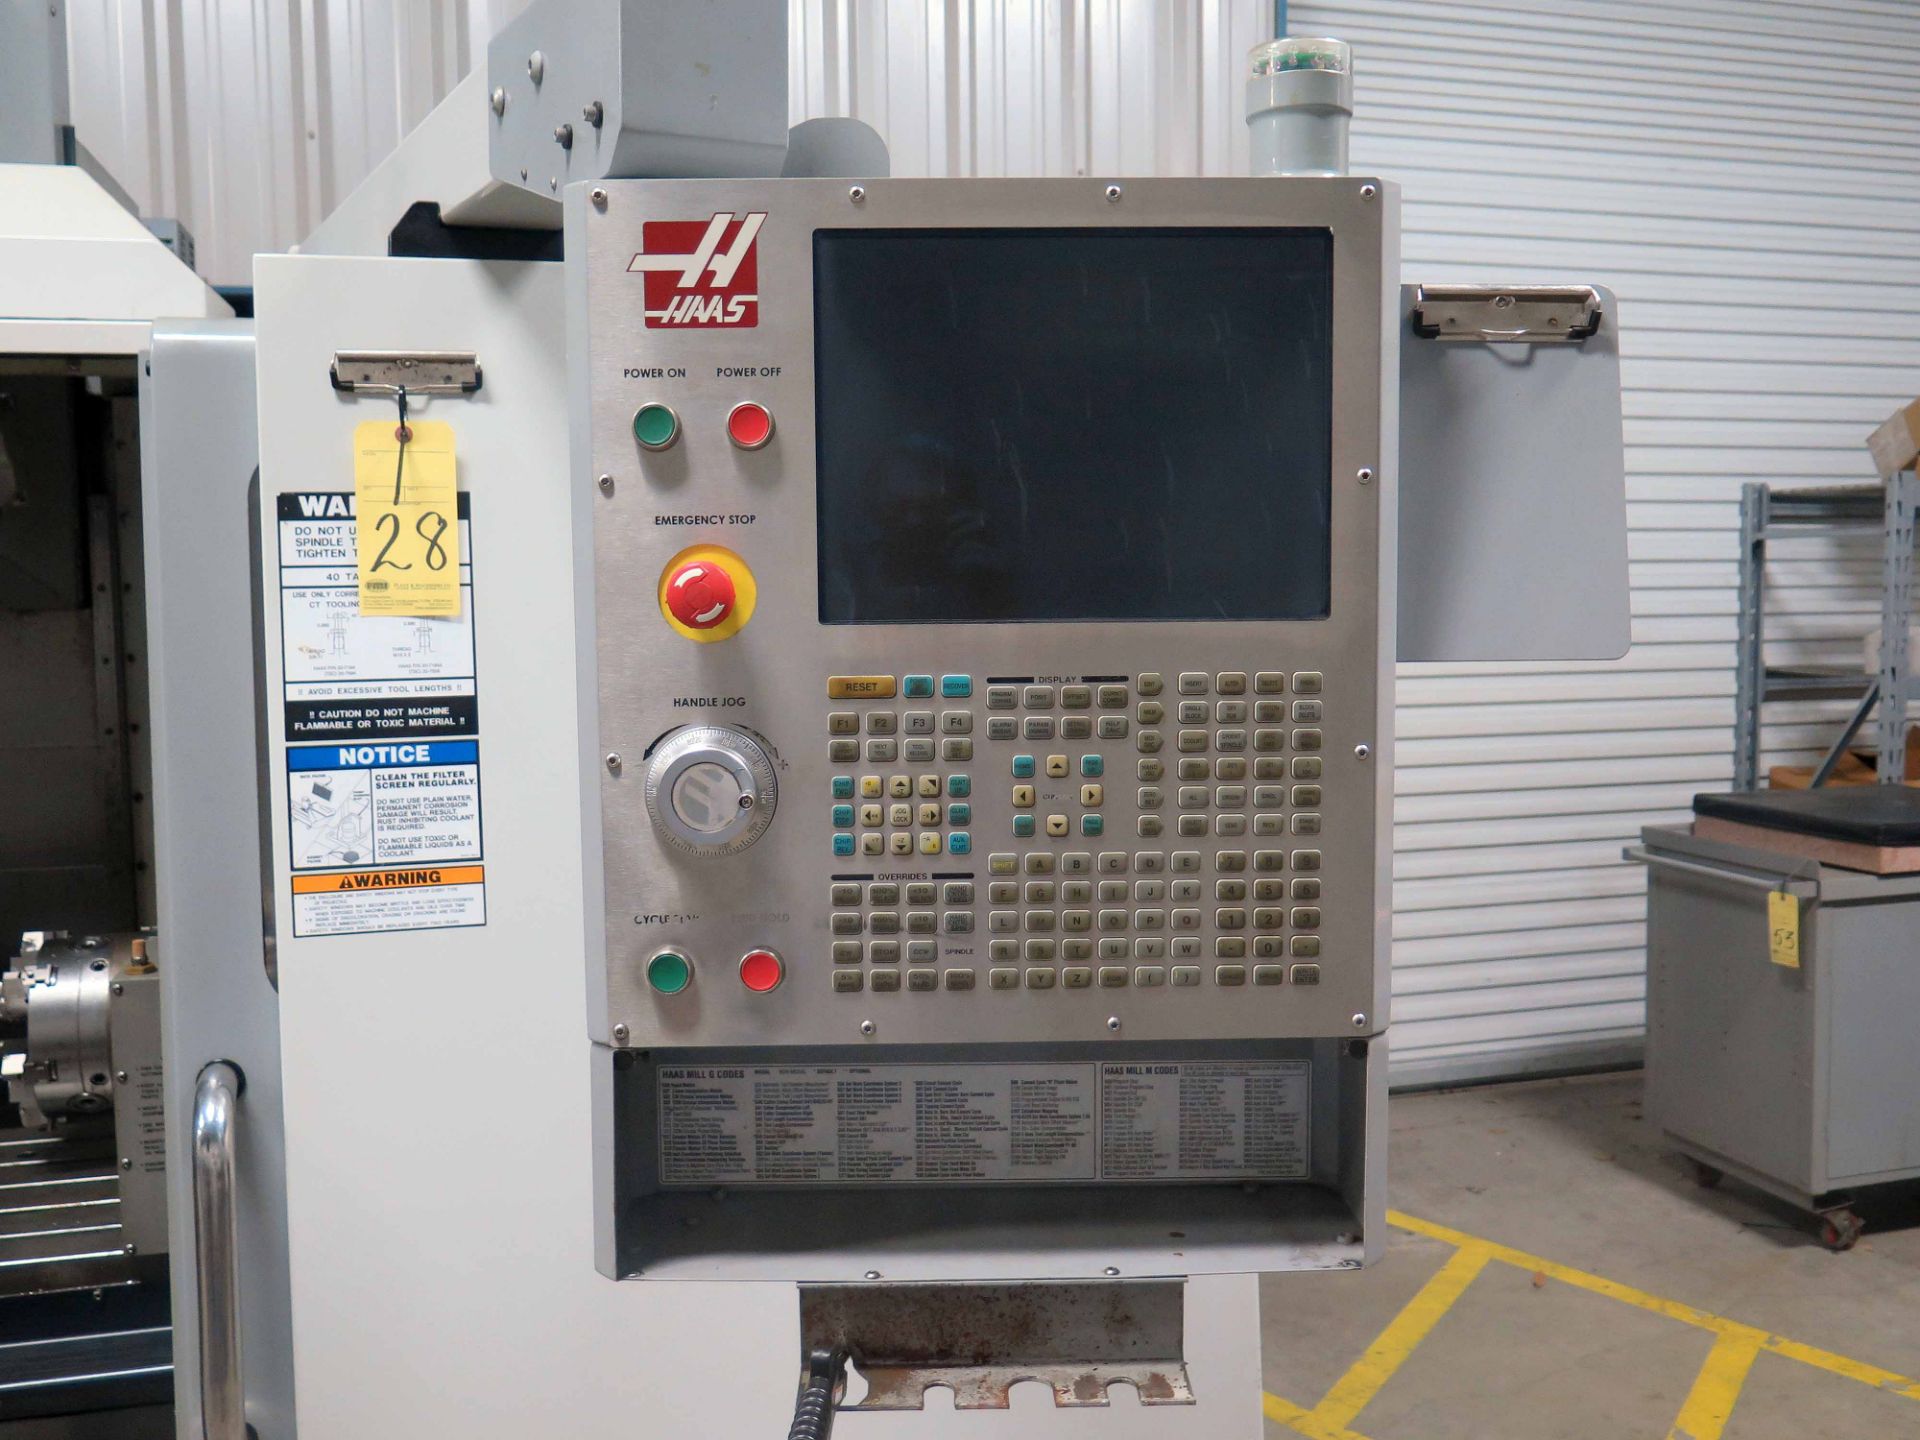 CNC VERTICAL MACHINING CENTER, HAAS MDL. VF-4B, new 2007, Haas V0P-A CNC control, 20 HP 2-spd. - Image 4 of 5